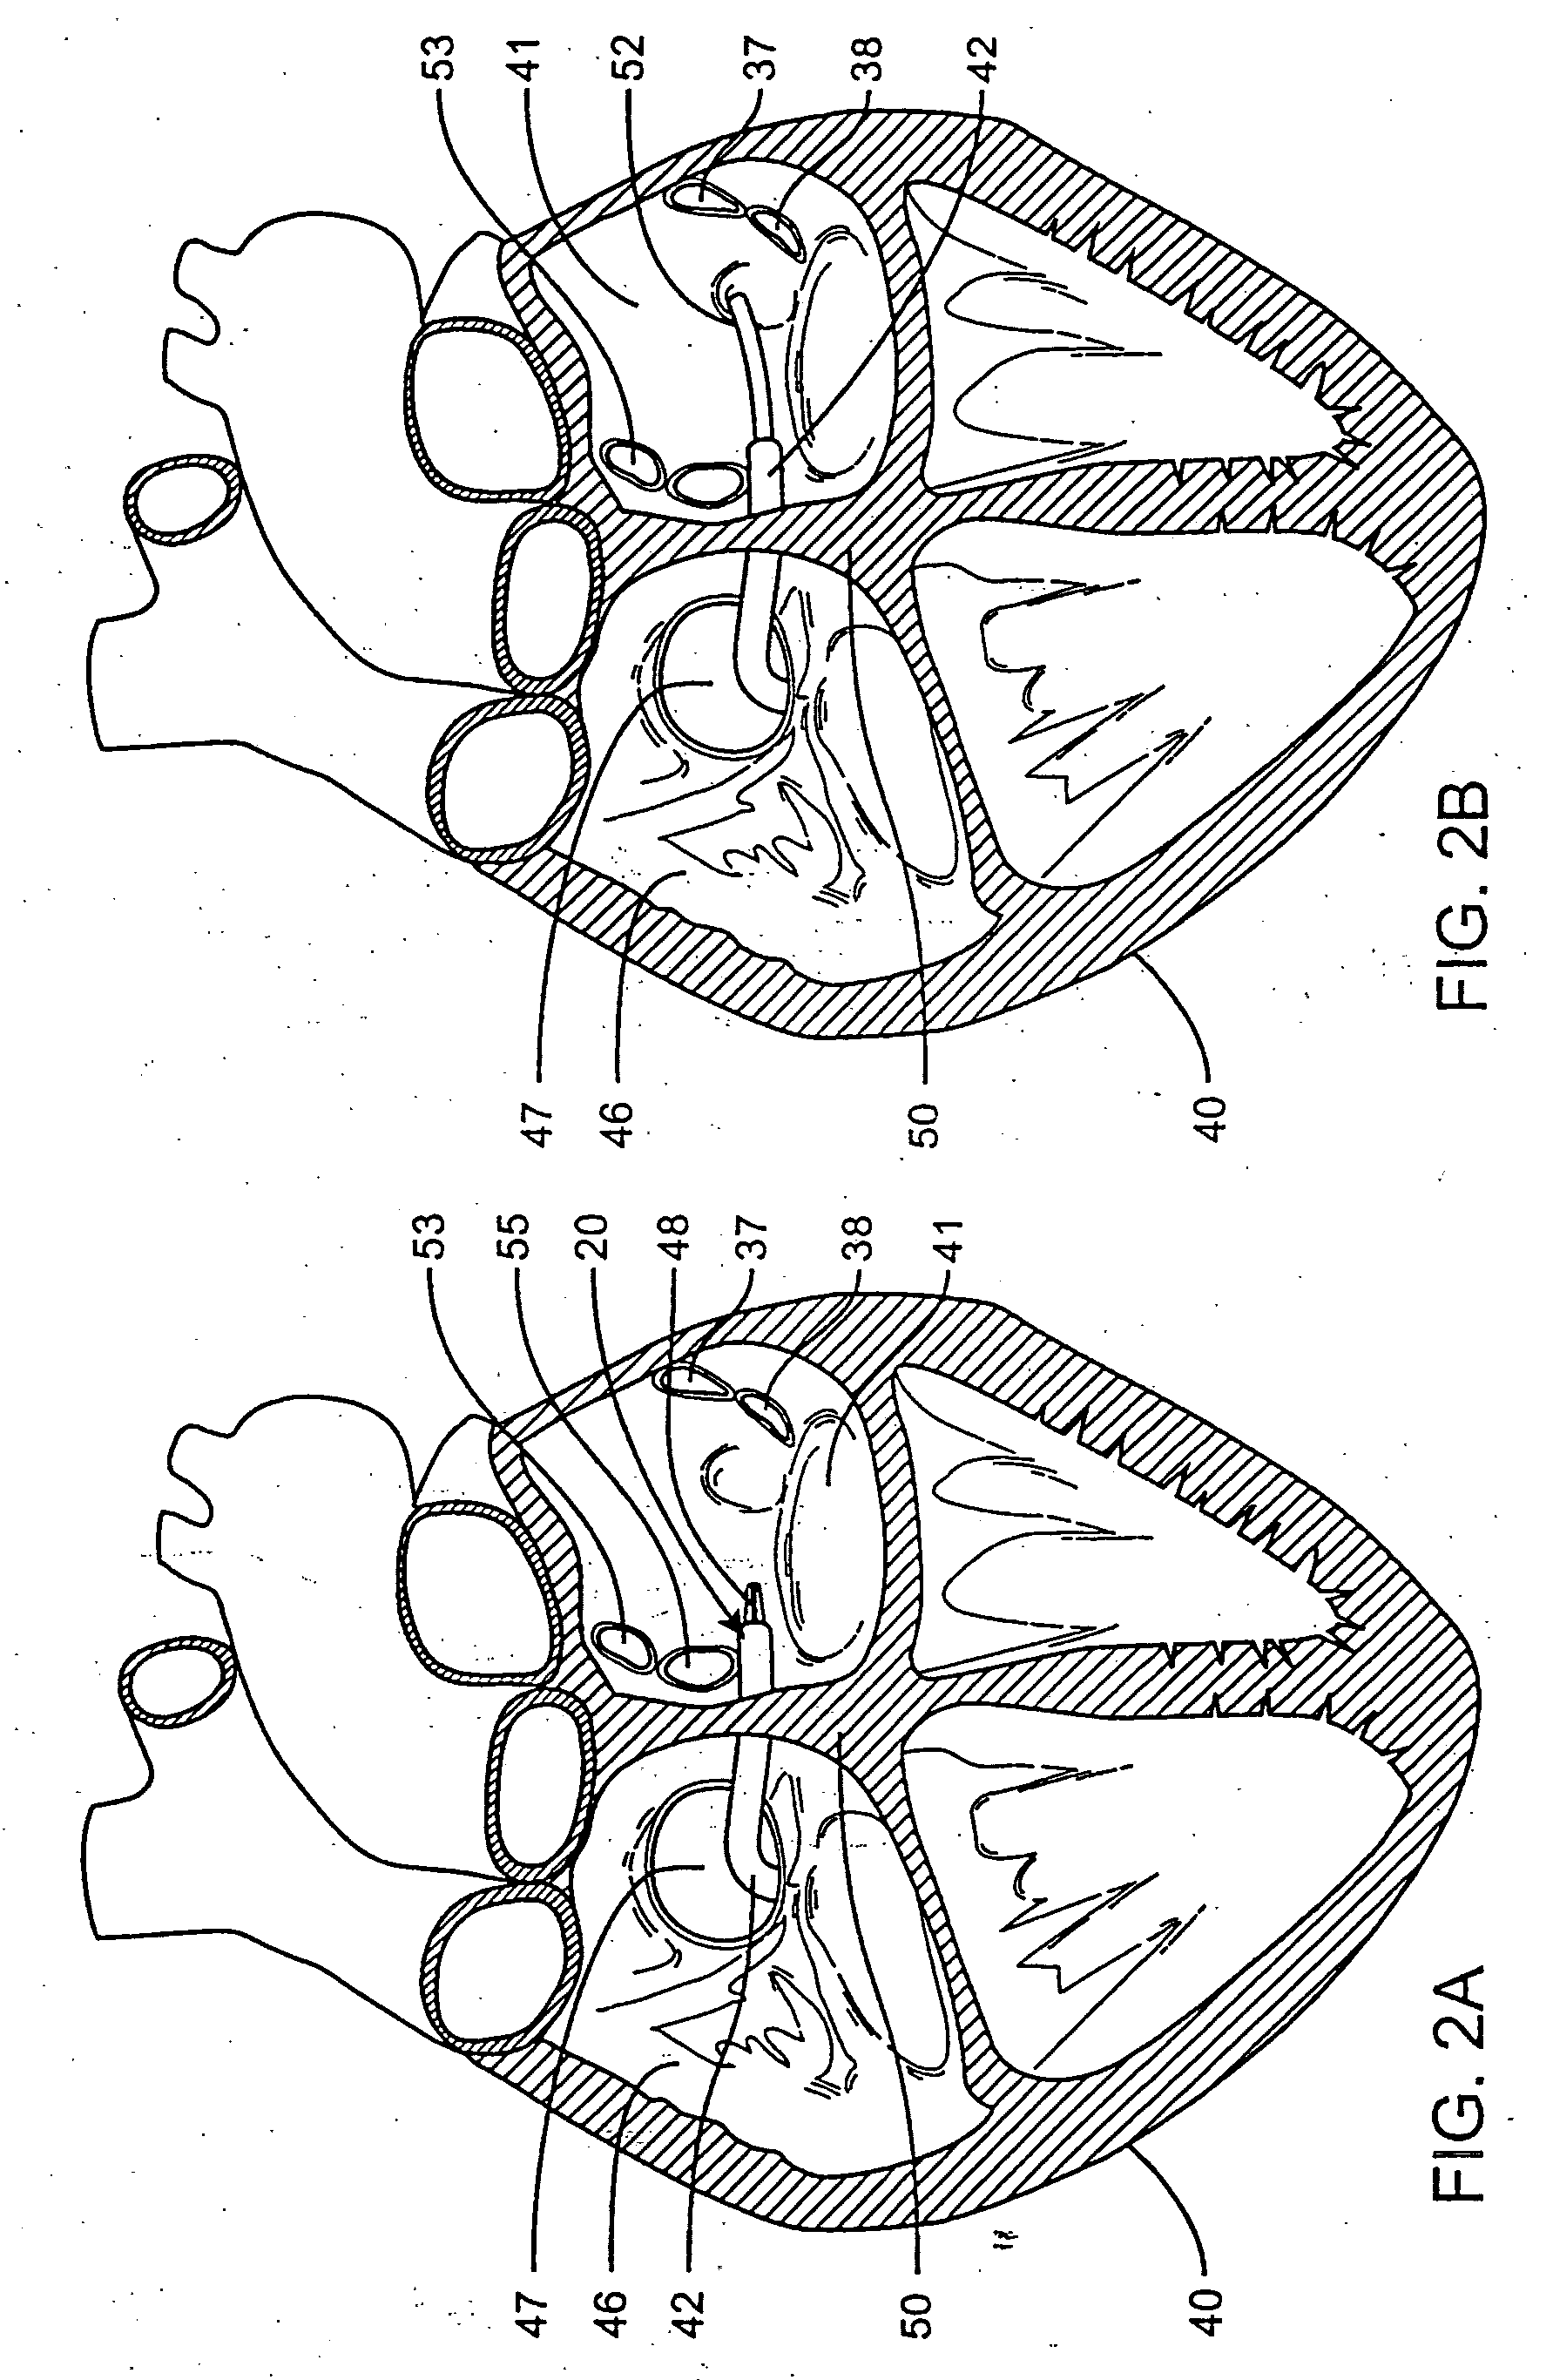 Method of positioning a medical instrument